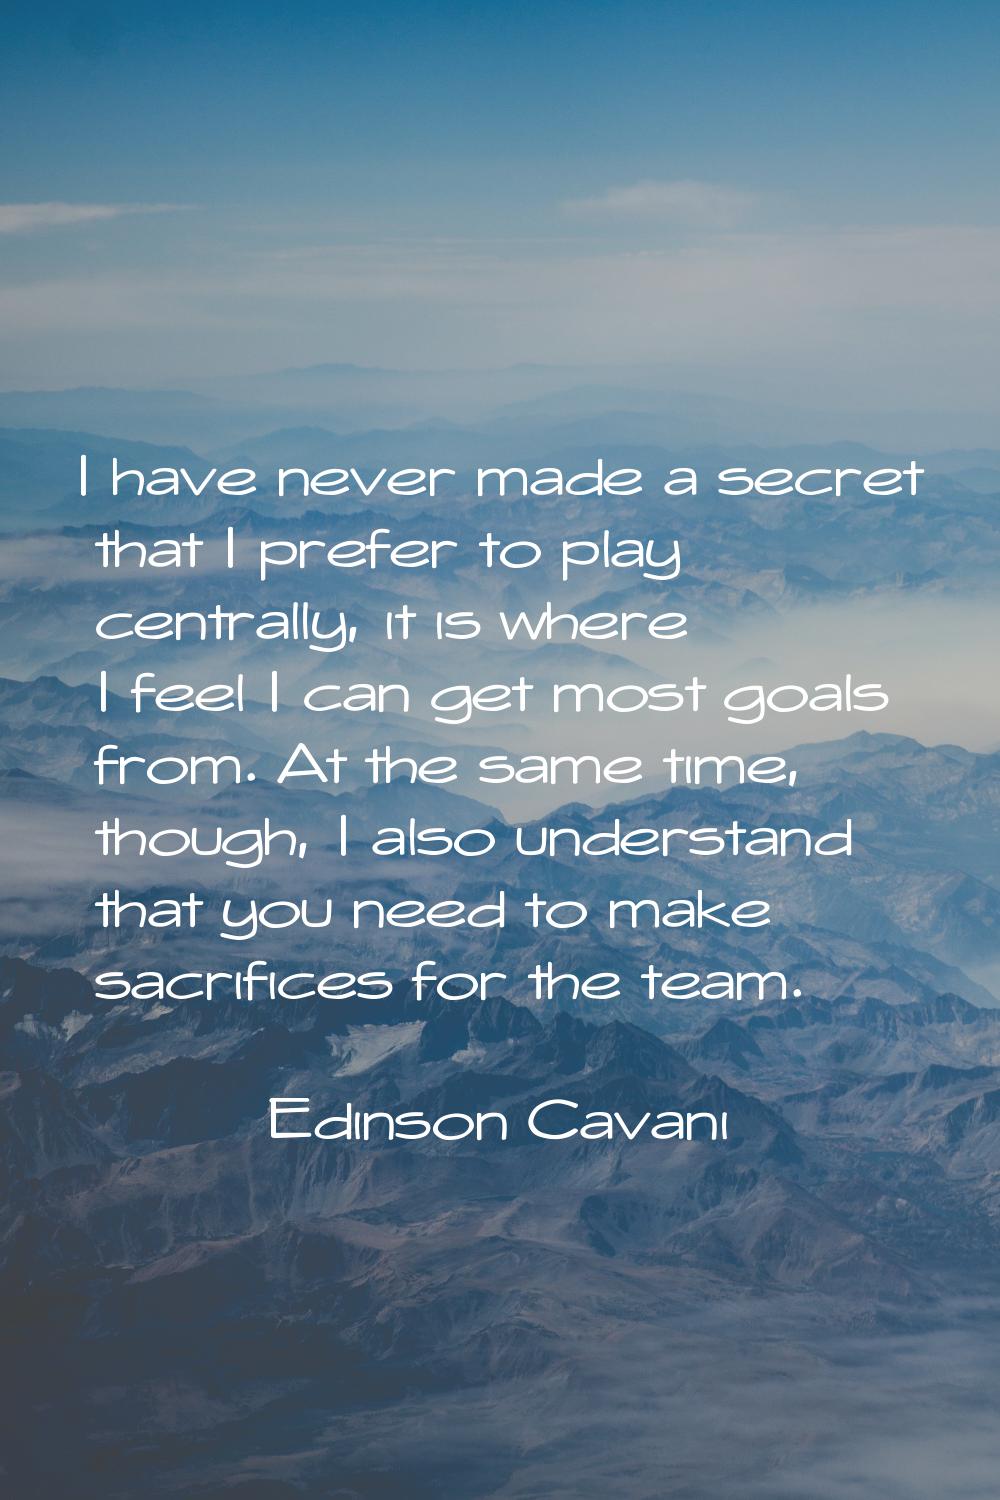 I have never made a secret that I prefer to play centrally, it is where I feel I can get most goals